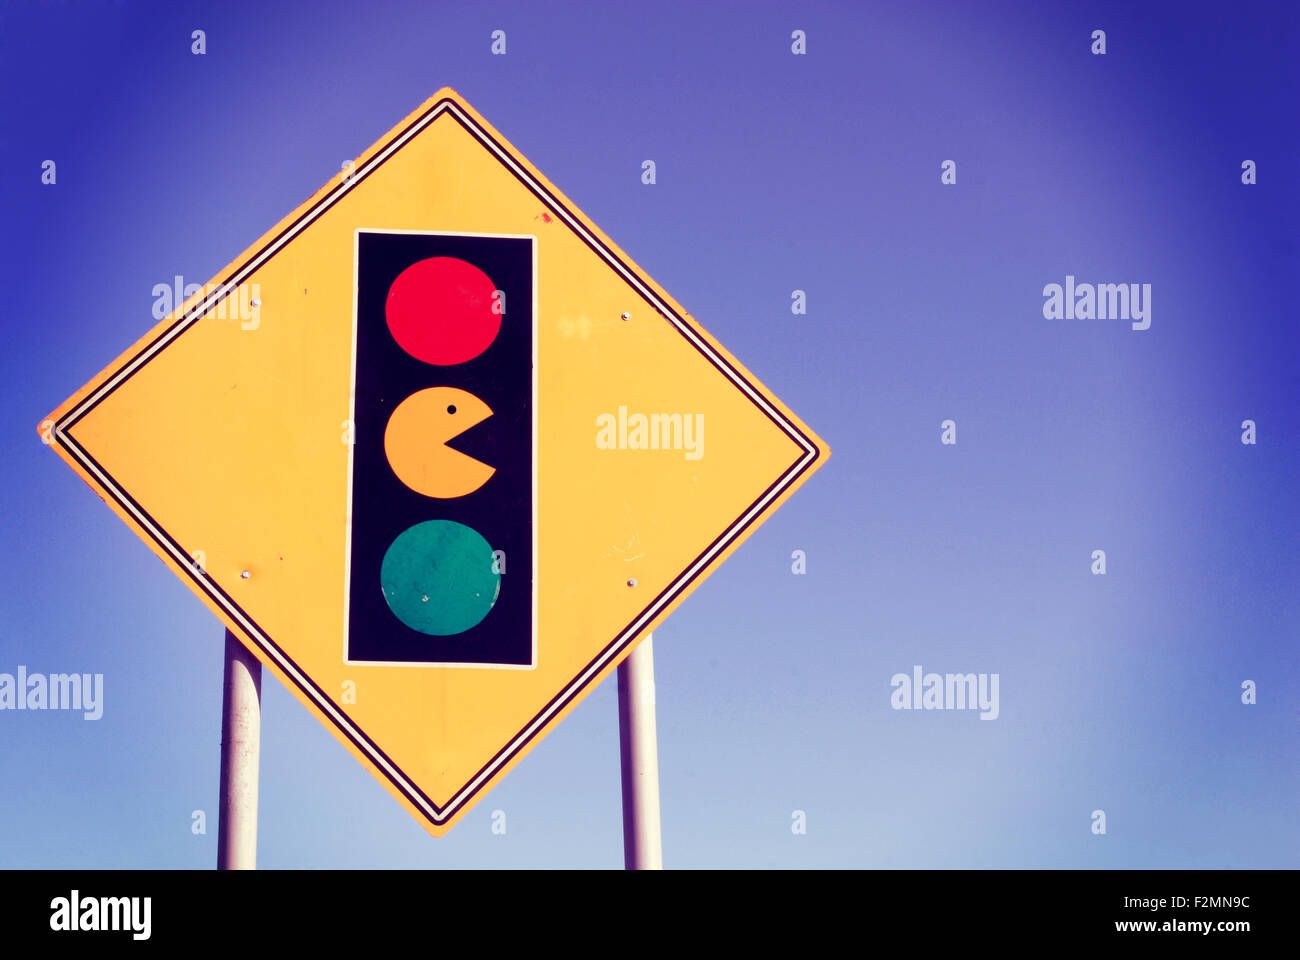 Game zone warning sign funny pacman and traffic light enjoy leisure activities. Ideal for poster, web, or online campaign. Stock Photo